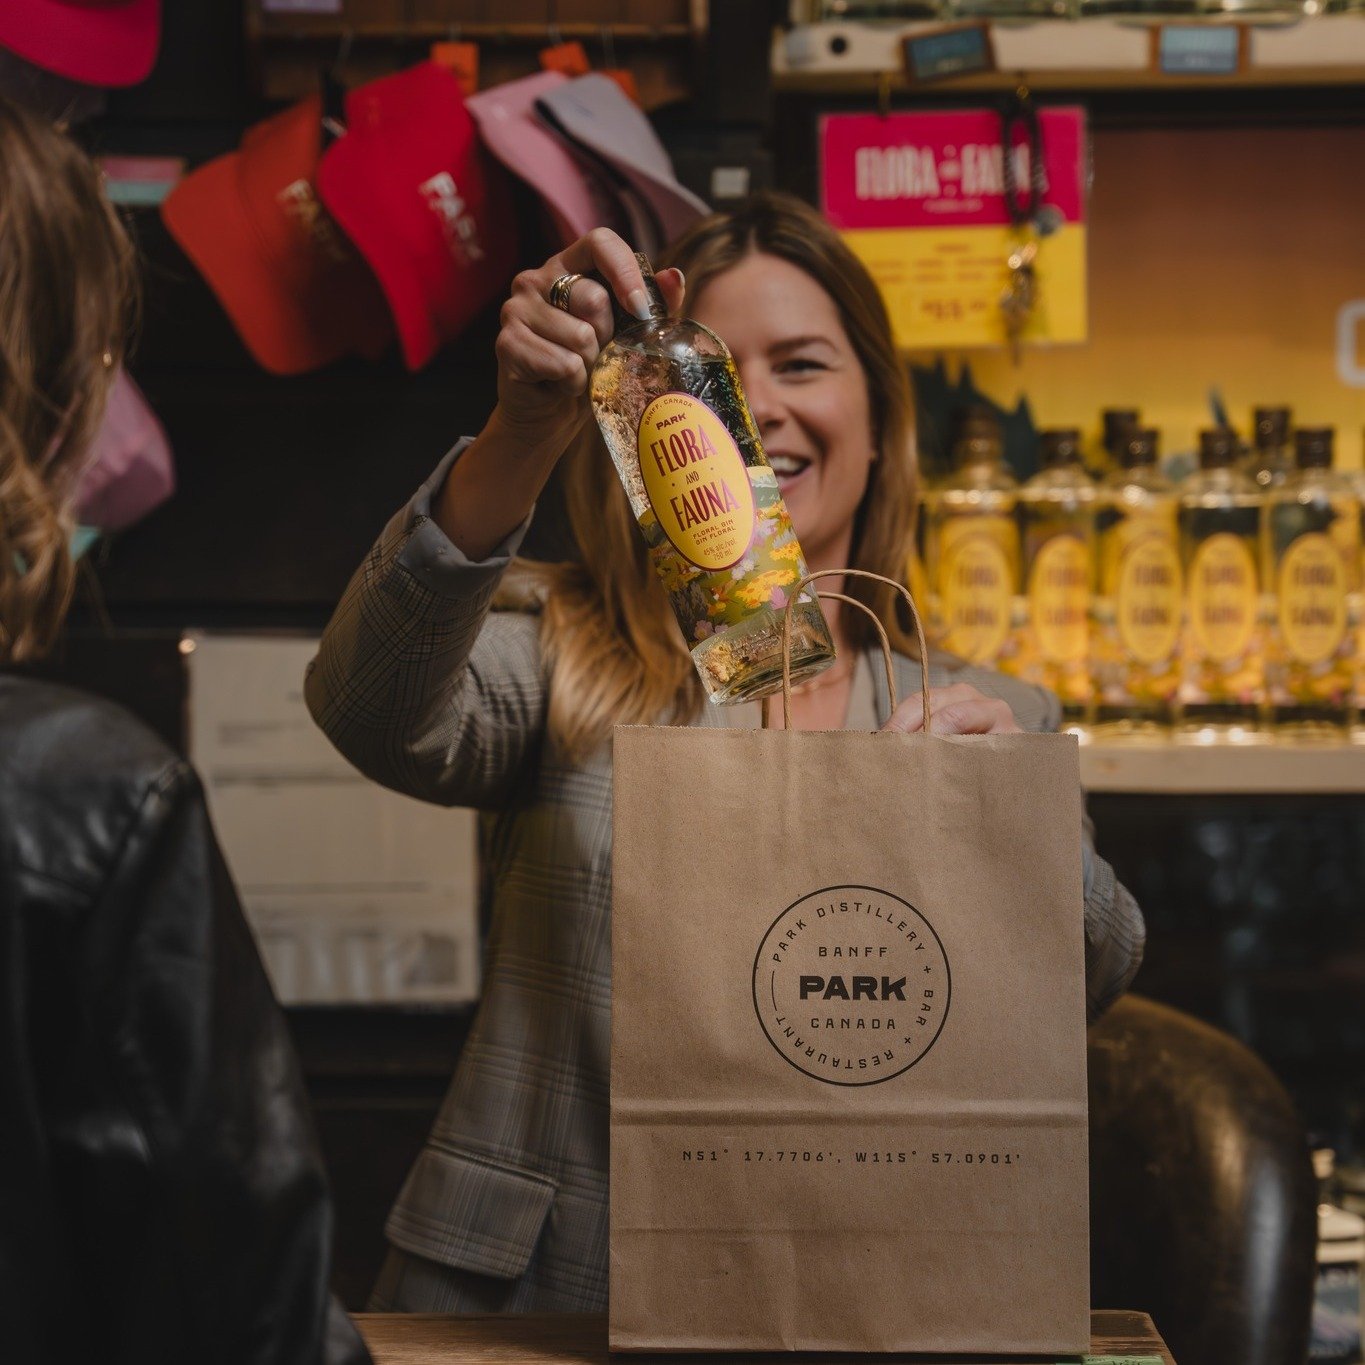 Together with @jolenesteahouse, @parkdistillery  has curated a trail of unique cocktails across Banff's favourite restaurants. Park Distillery, Jolene's Tea House, and all restaurants are located within a 5-minute walk of each other. Plan your own ro